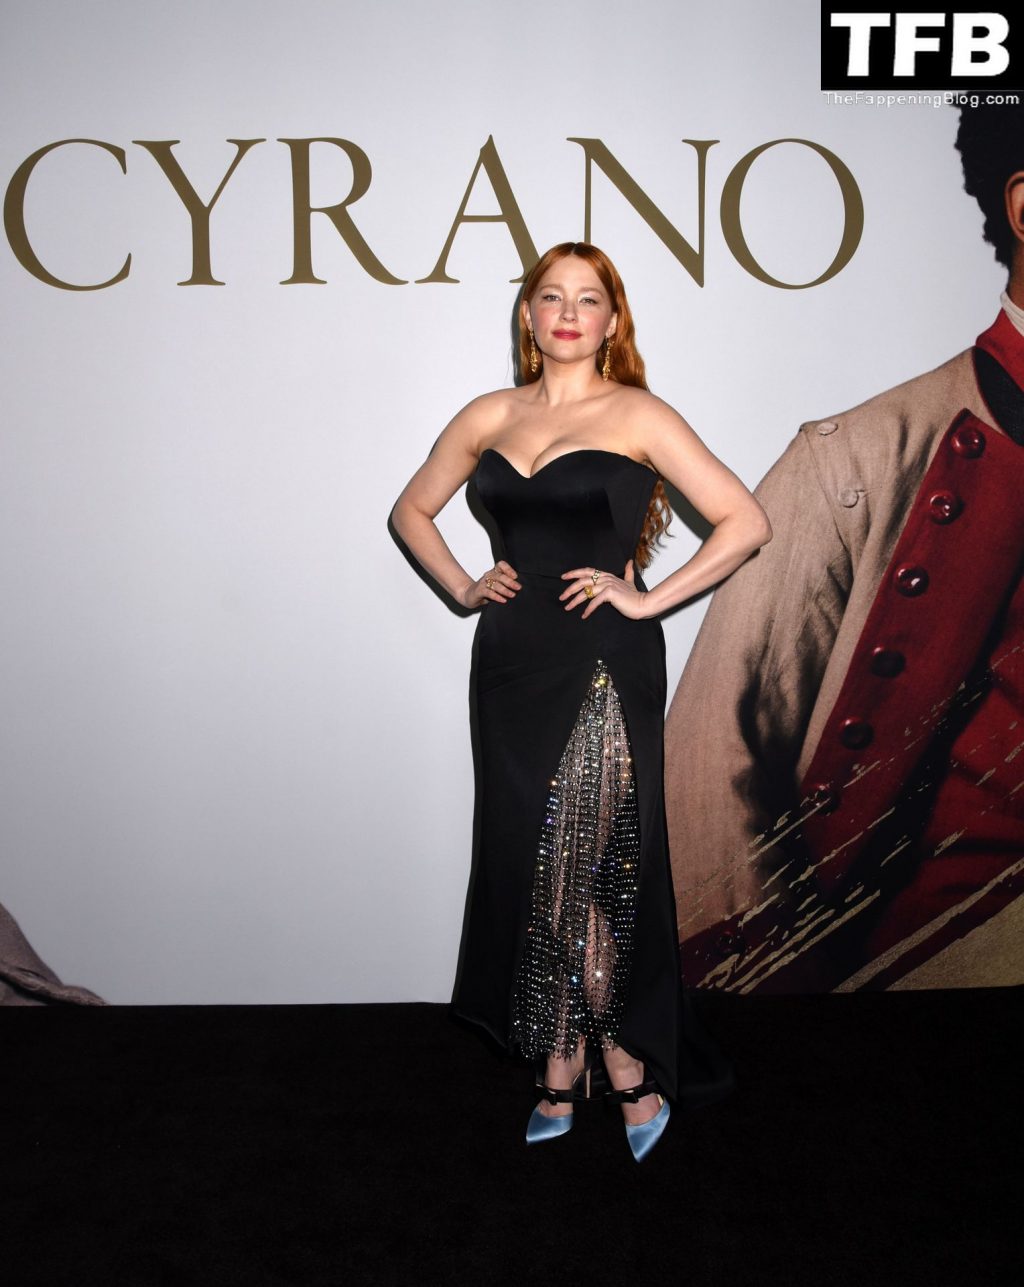 Haley Bennett Sexy The Fappening Blog 23 1024x1287 - Haley Bennett Shows Off Her Sexy Boobs at the Premiere of “Cyrano” in NYC (43 Photos)